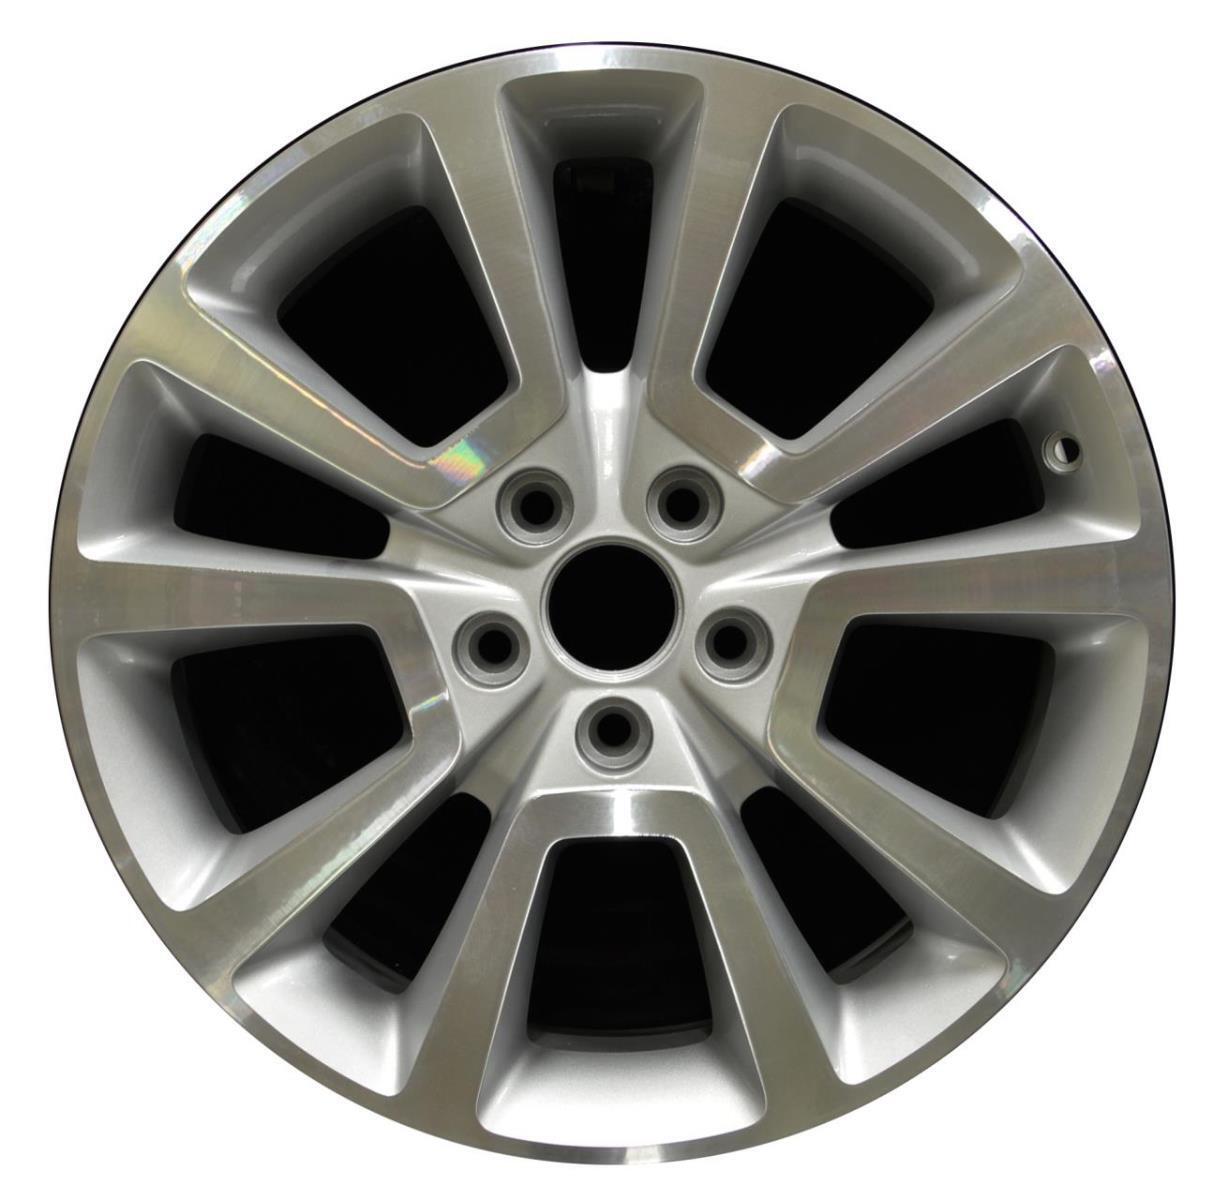 (1) Wheel Rim For Caliber Recon OEM Nice Silver Machined